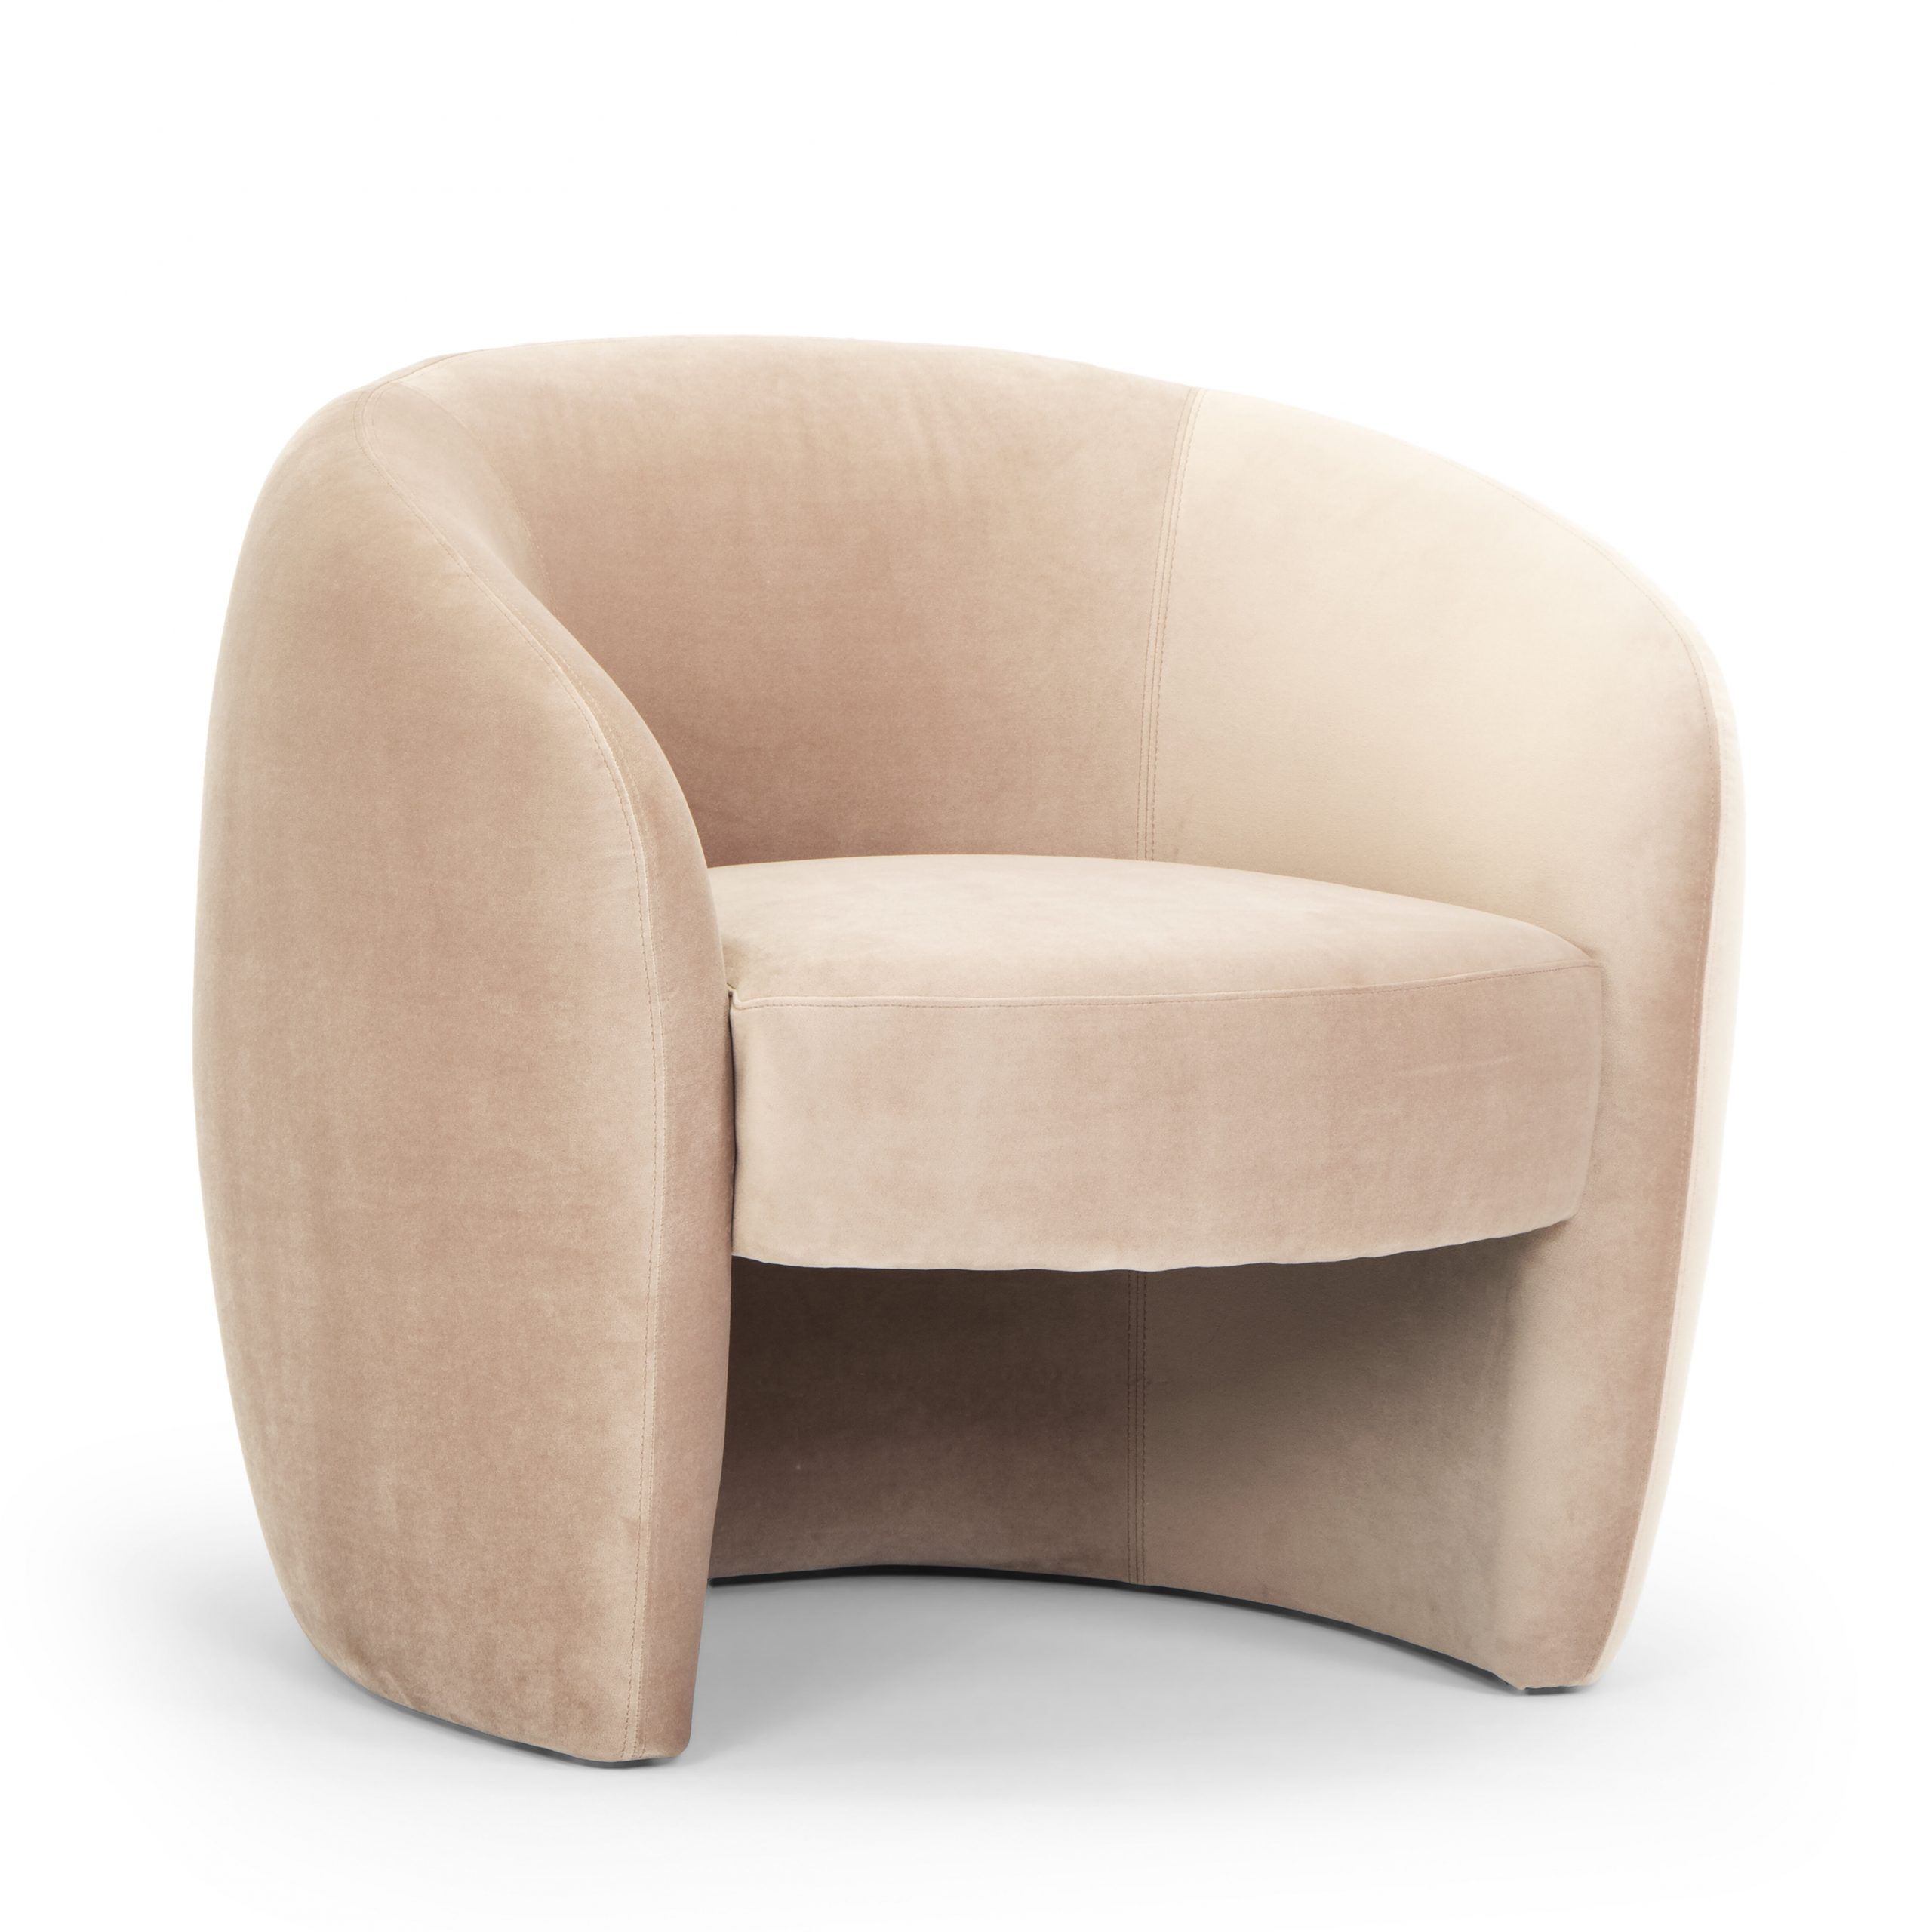 Wayfair Intended For Ziaa Barrel Chairs (View 18 of 20)